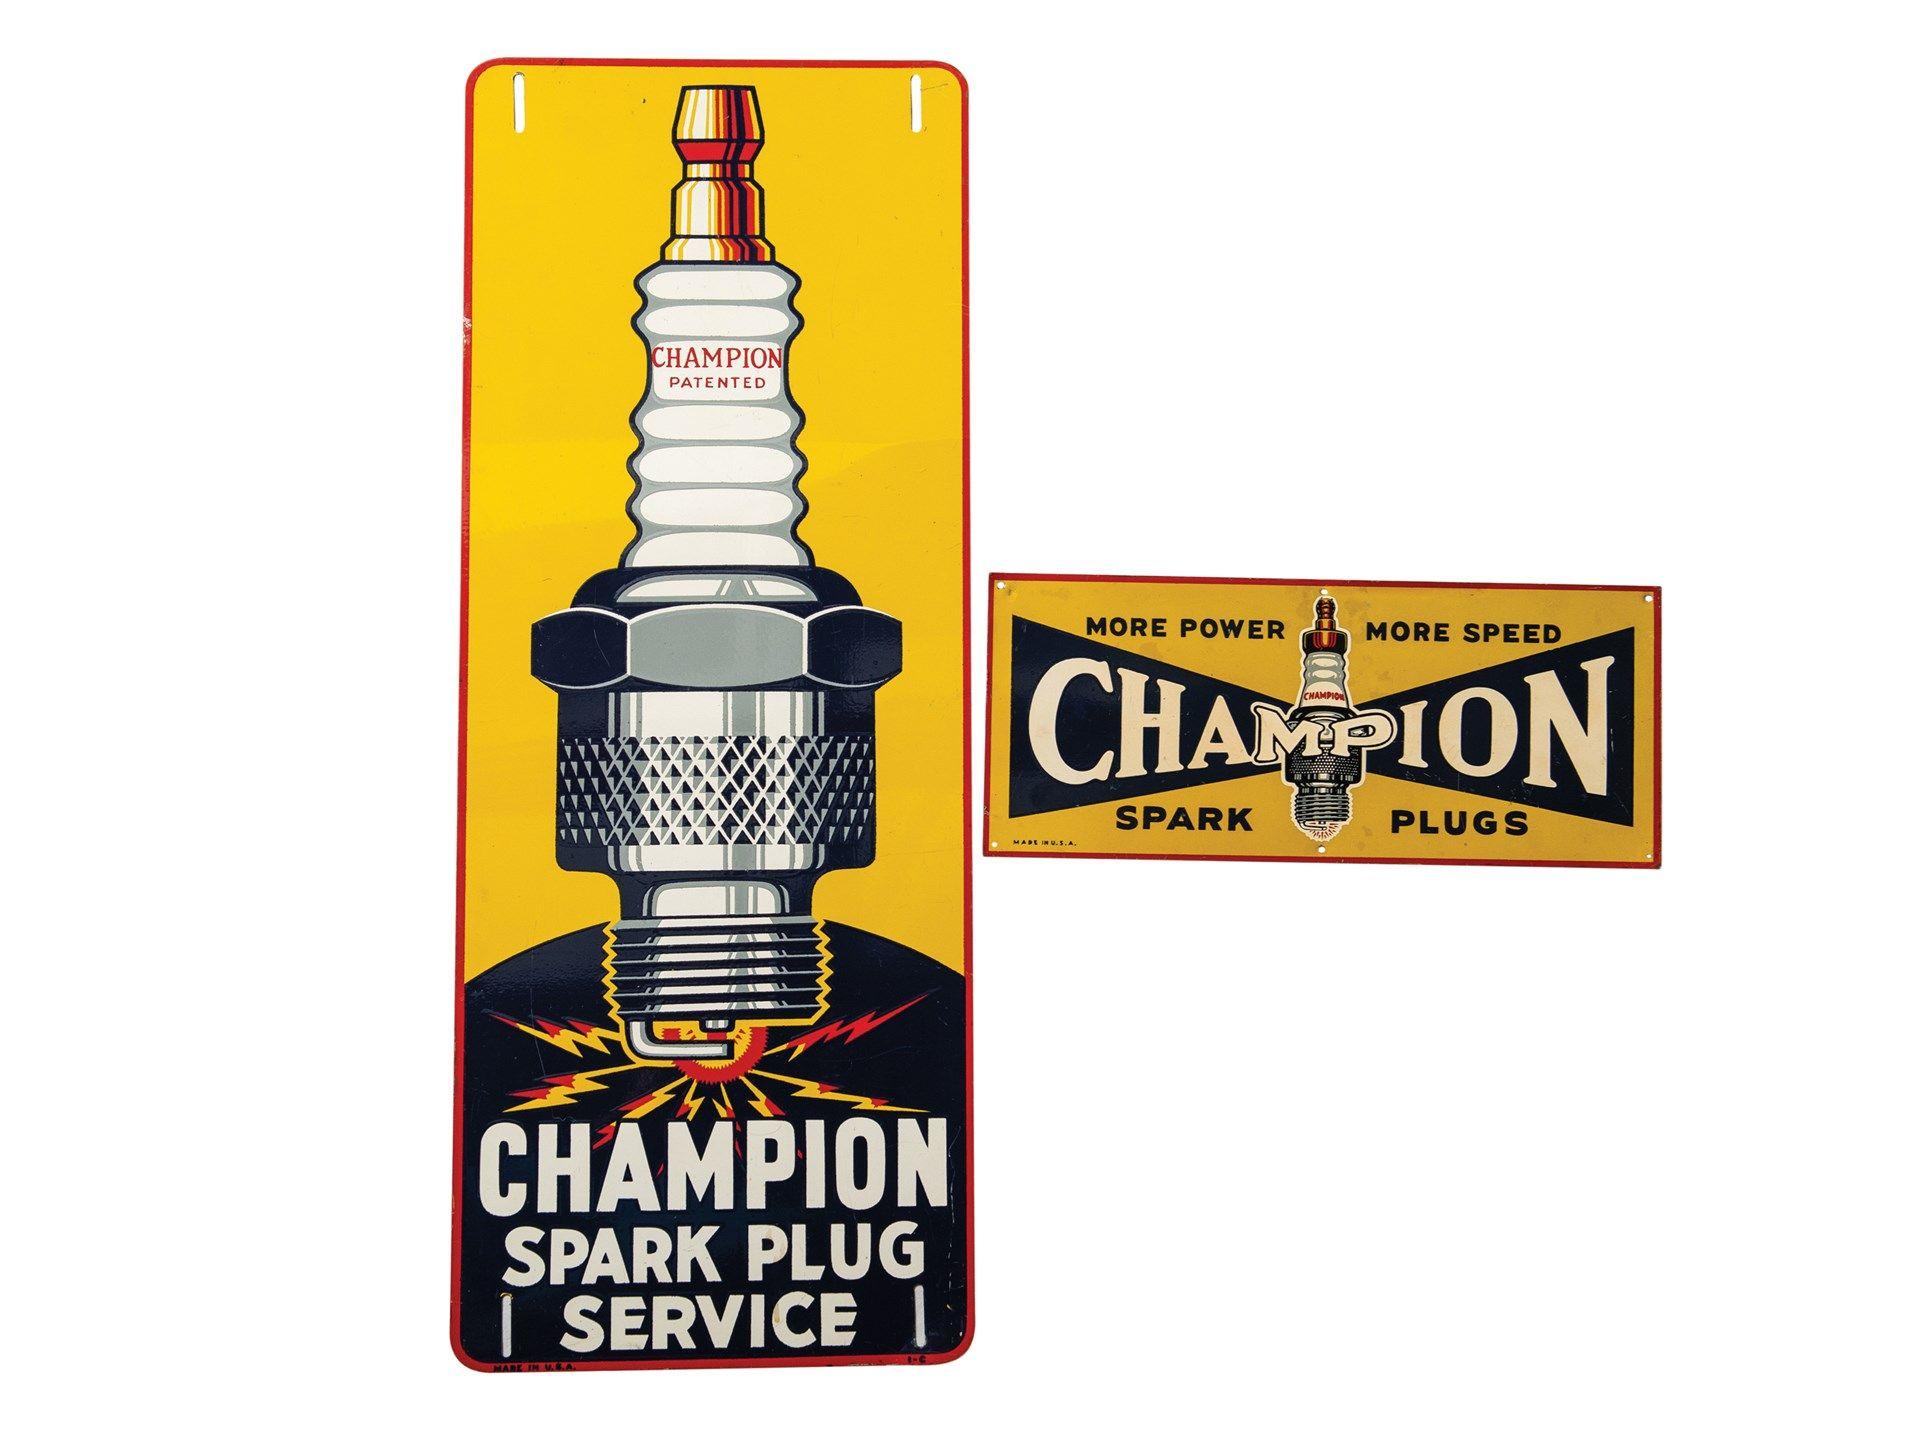 Champion Spark Plugs Logo - RM Sotheby's Spark Plugs Signs. The Dingman Collection